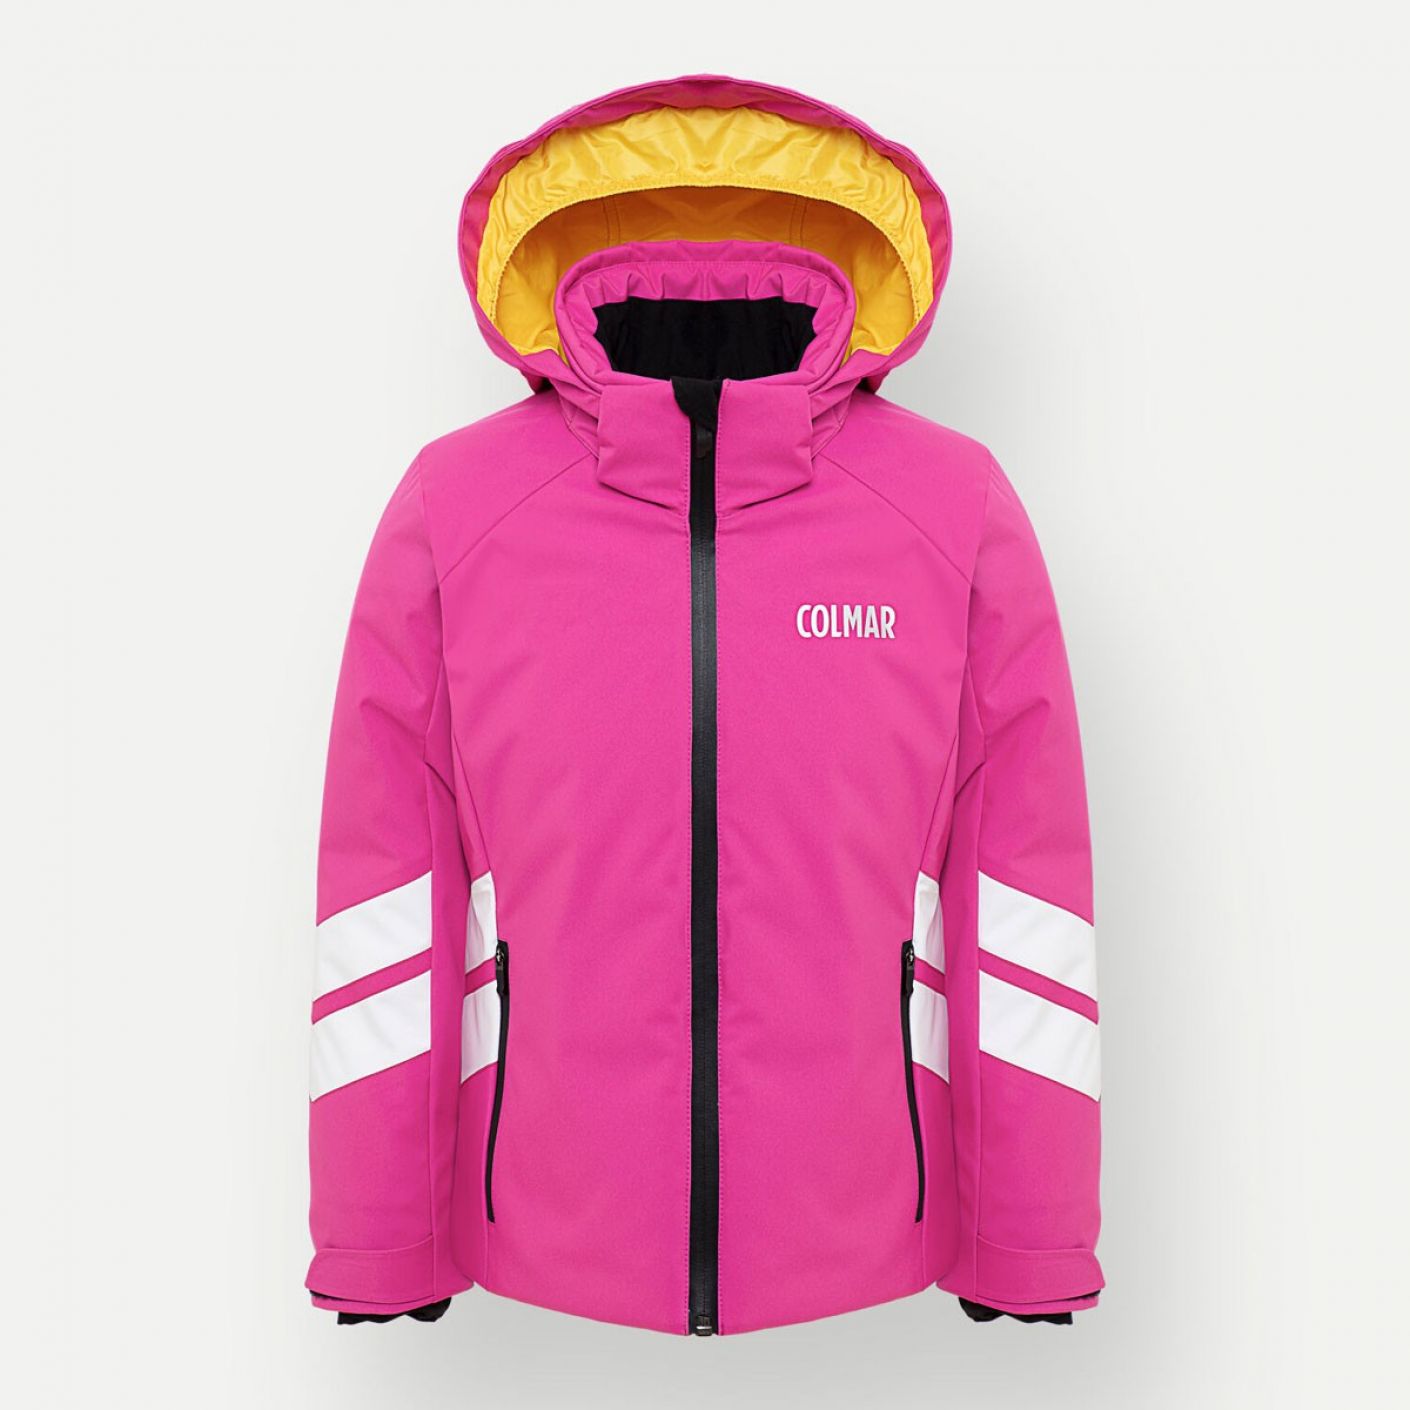 Colmar Girl Ski Suit with Race Pink details